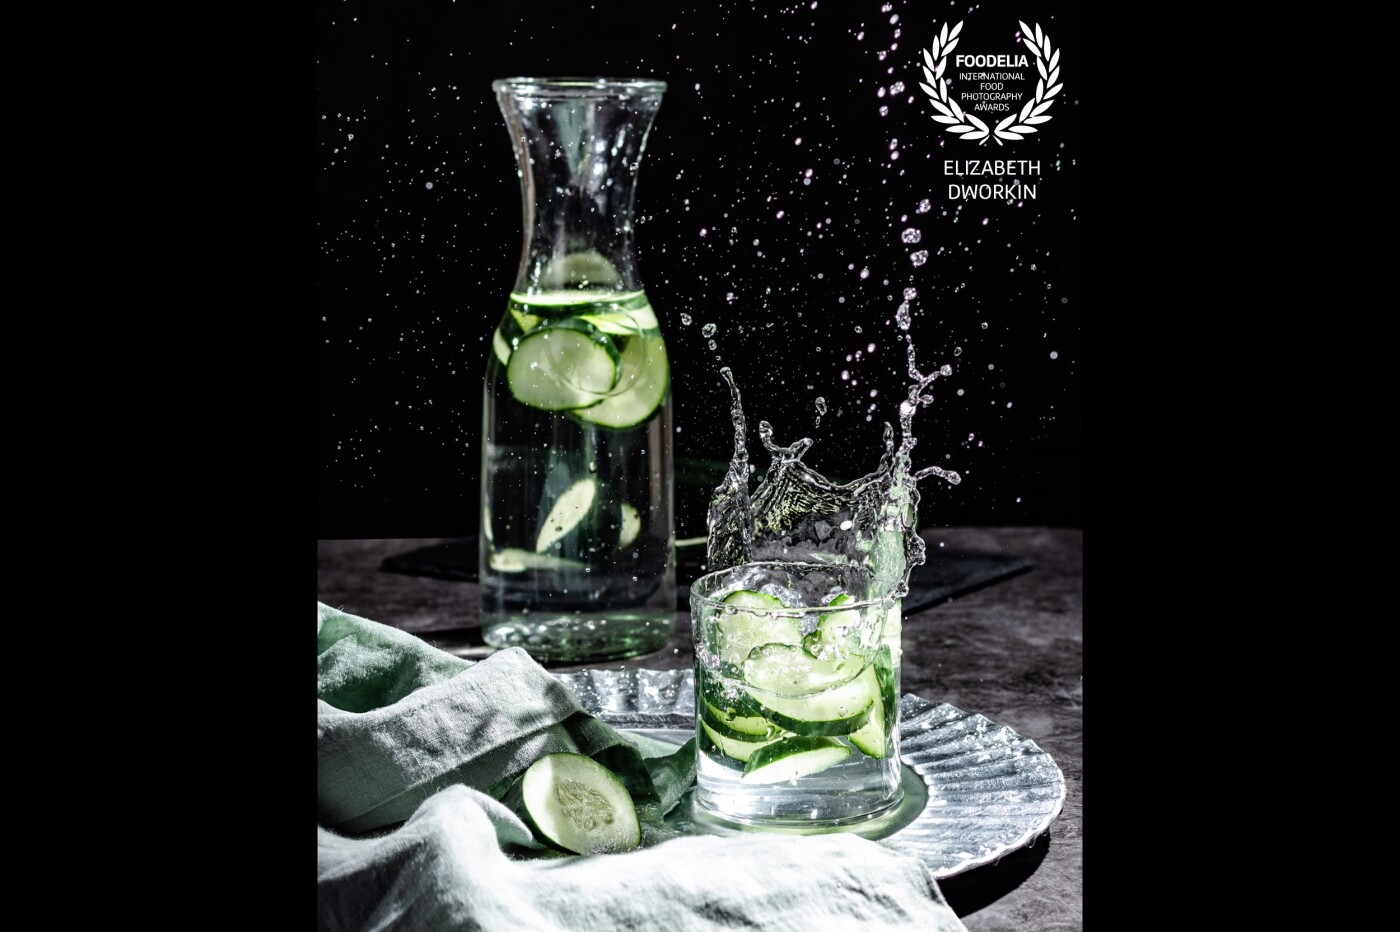 This picture of cucumber water was my very first attempt at splash photography. Less than a year after this photography journey began, it is so nice to see how hard work and determination can help anyone grow. <br />
<br />
Doesn't it look refreshing?